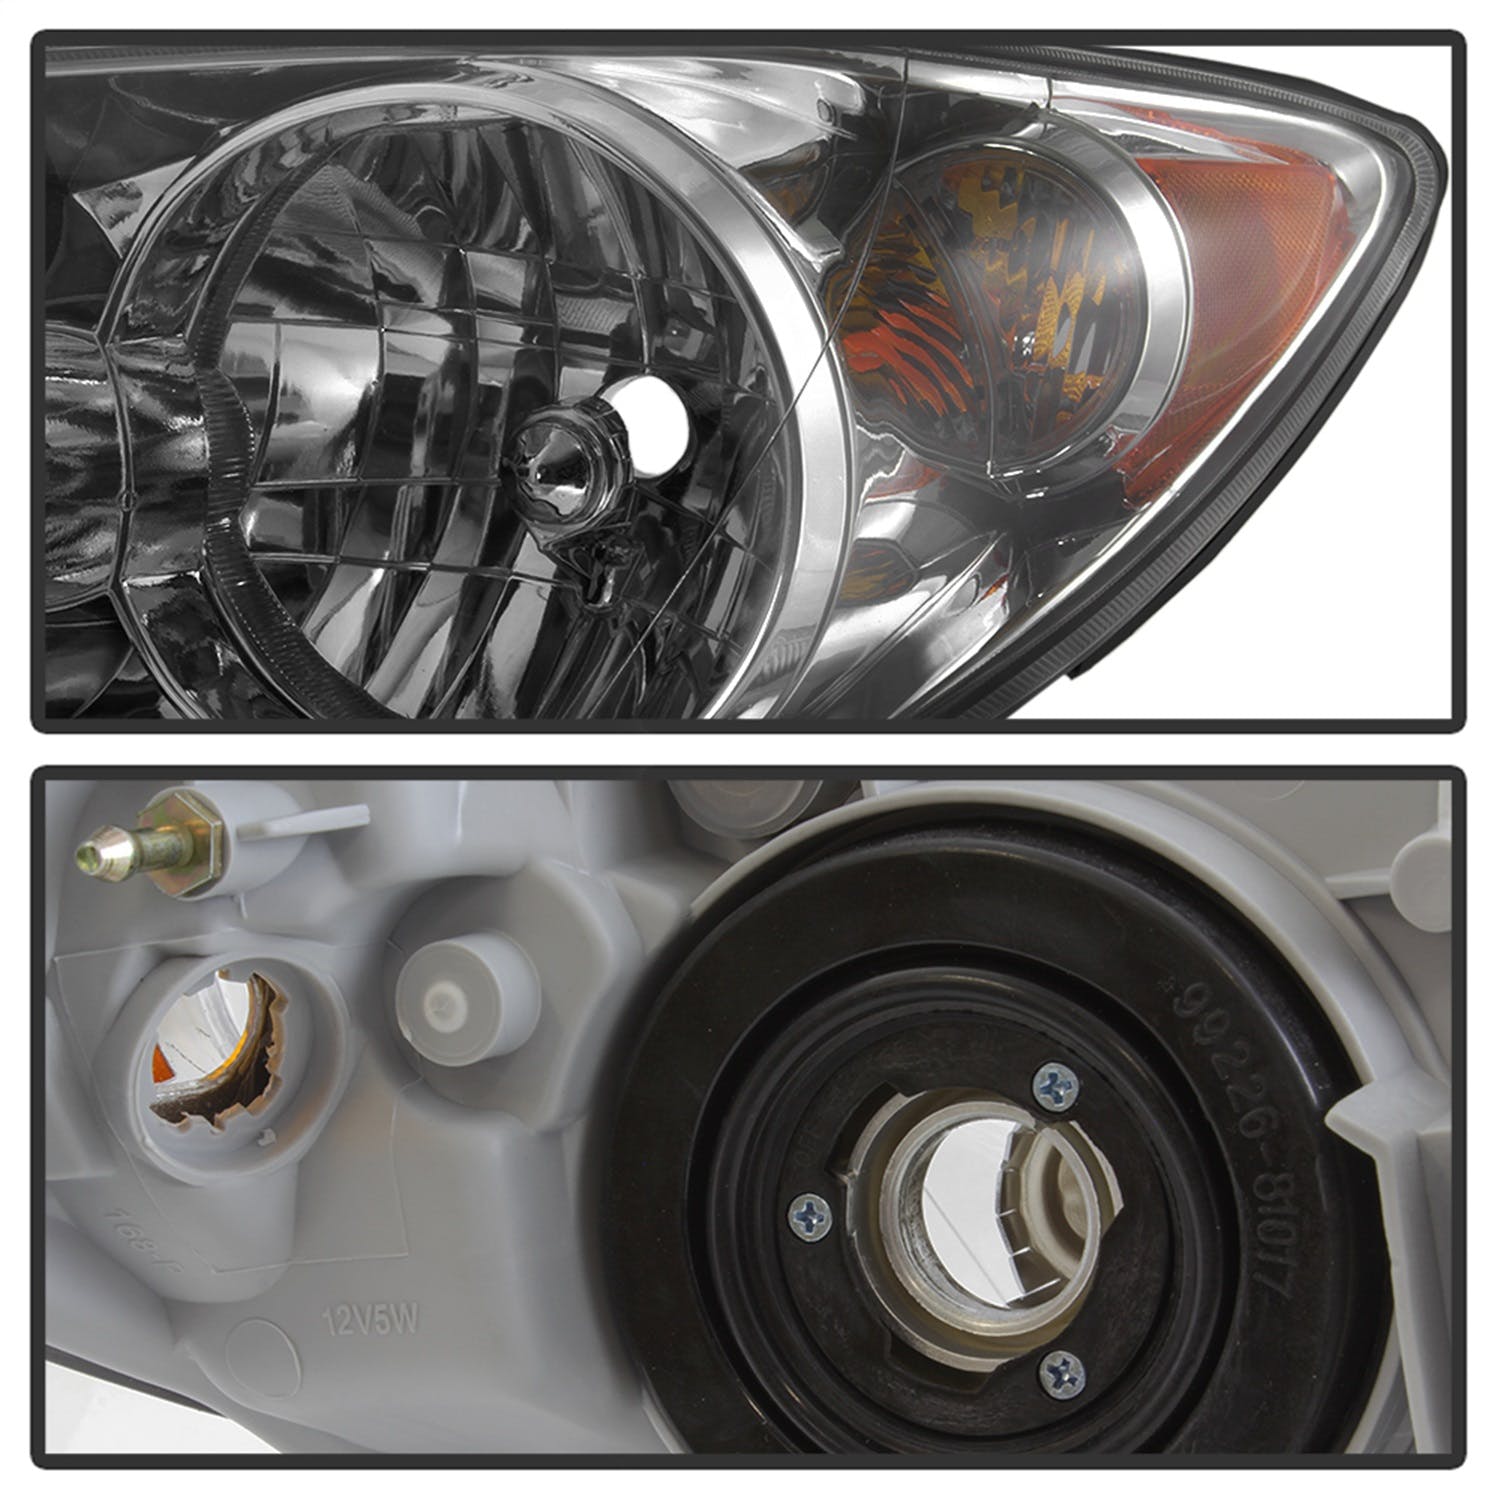 XTUNE POWER 9042430 Toyota Camry 05 06 (US Built Models Only ) OEM Style Headlights Chrome